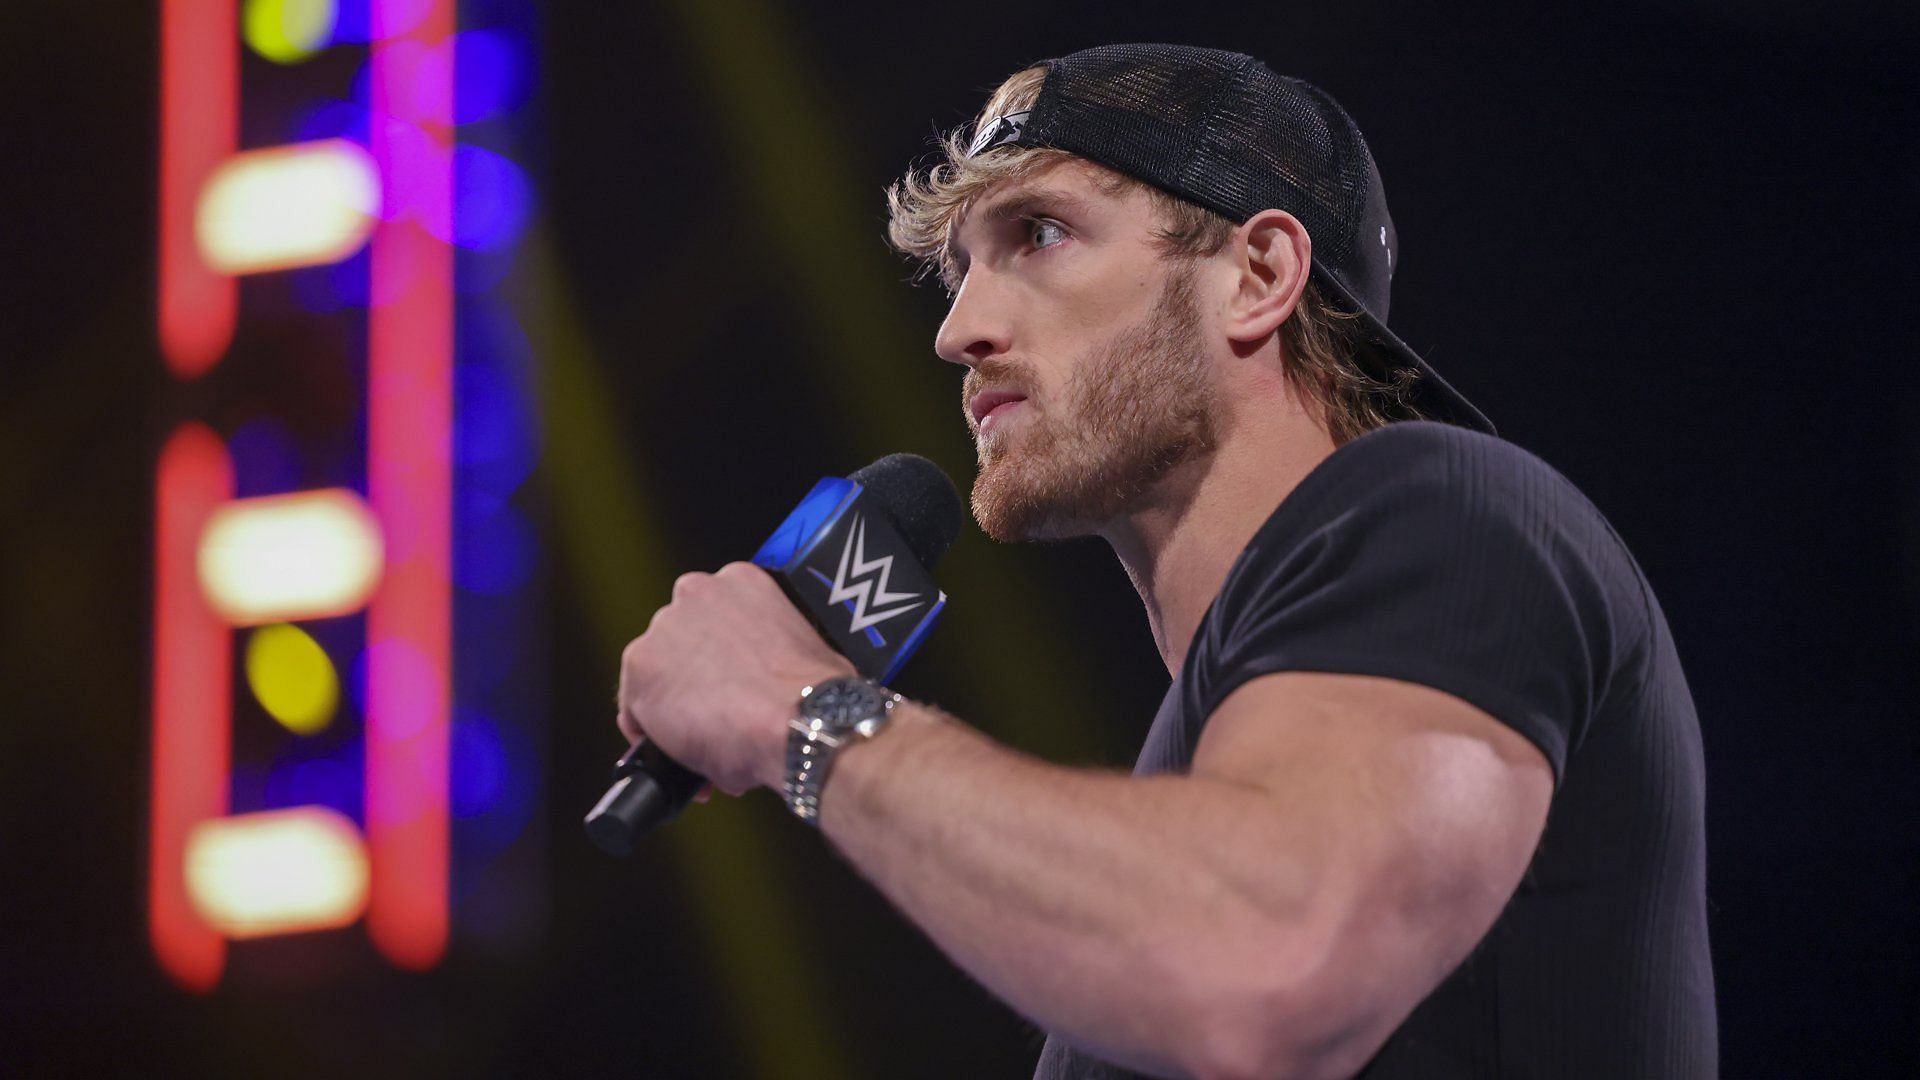 4 things Bron Breakker can do if he appears on WWE SmackDown this week